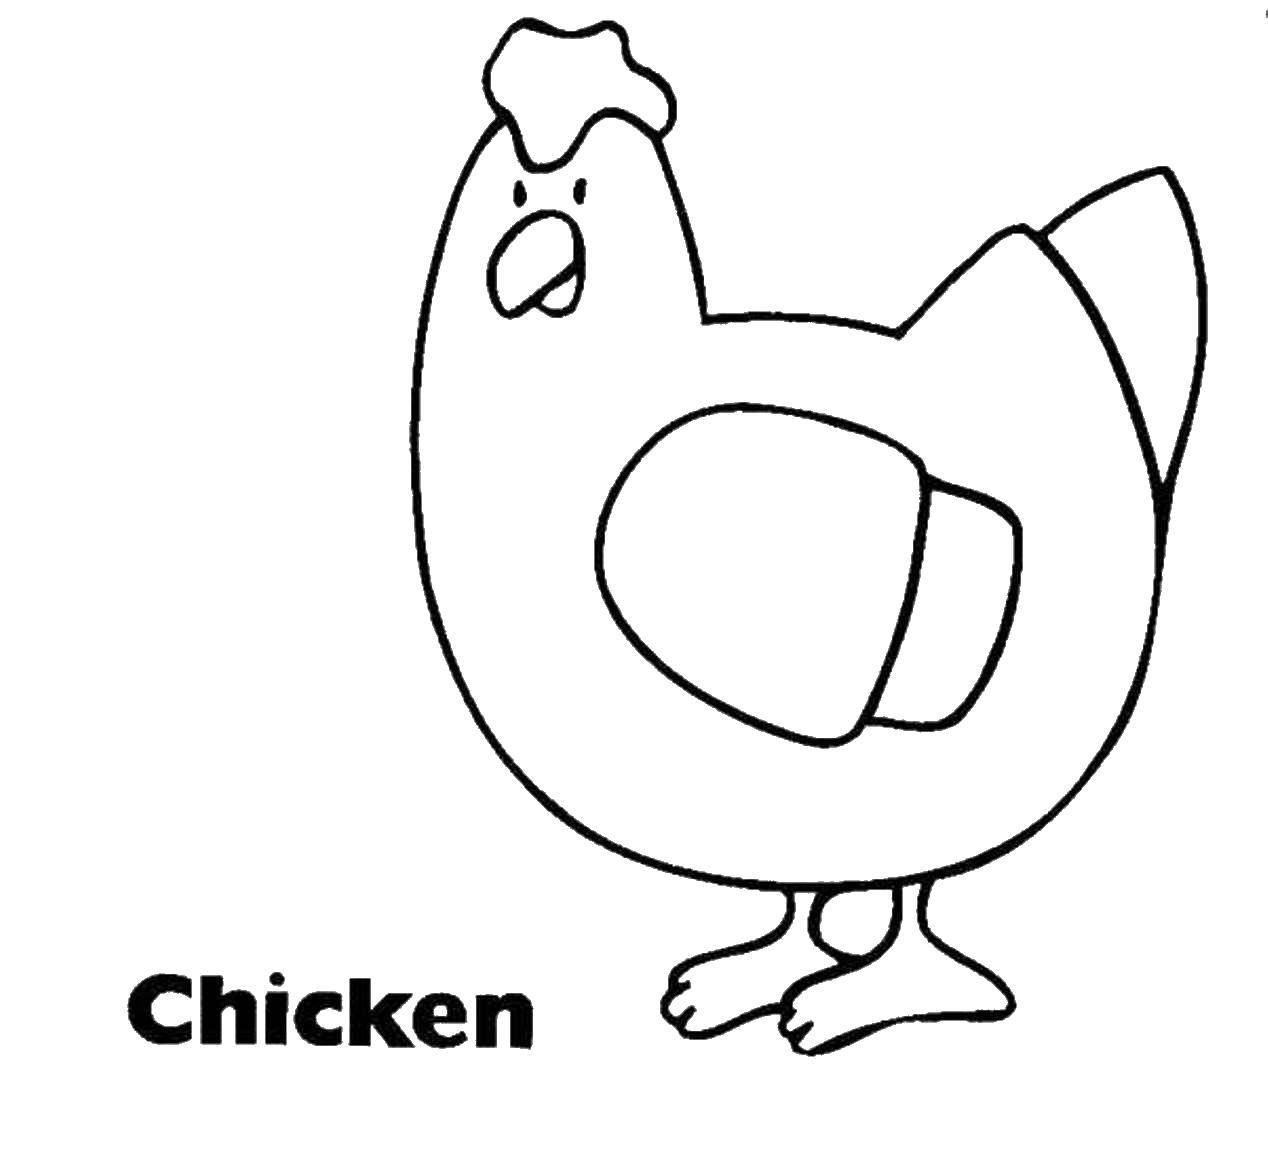 Coloring Chicken. Category simple coloring. Tags:  Poultry, chicken.